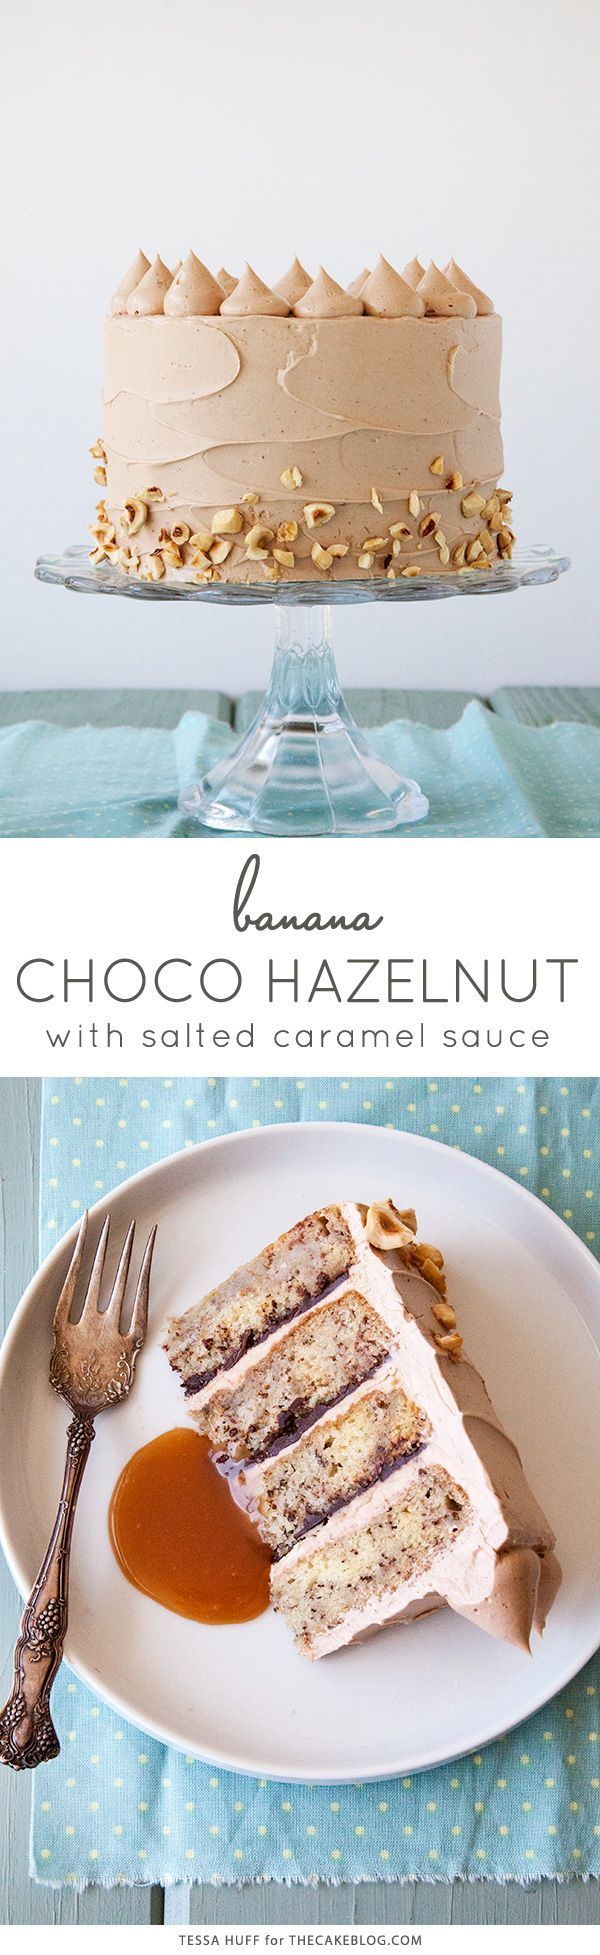 Banana Chocolate Hazelnut Cake with Salted Caramel Sauce. Or, in other words, all of my favorite flavors in one cake. This one is